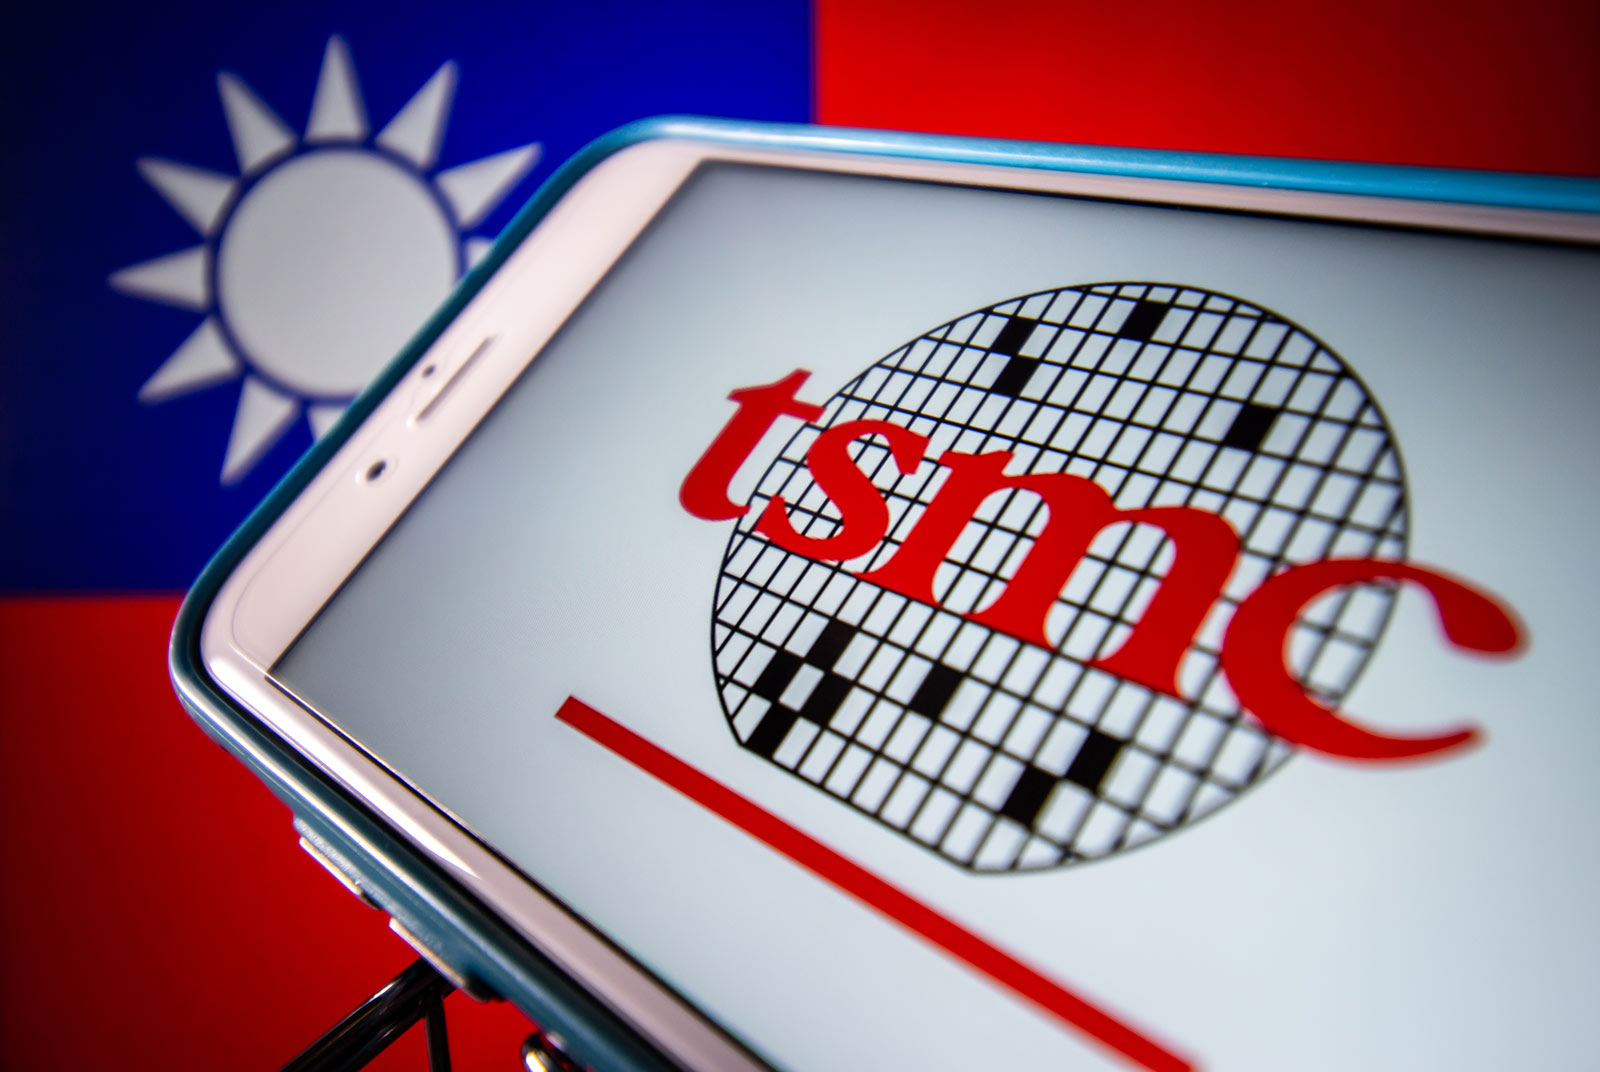 TSMC alone cannot rebuild the US semiconductor supply chain - Taiwanese Hidden Champions need to follow